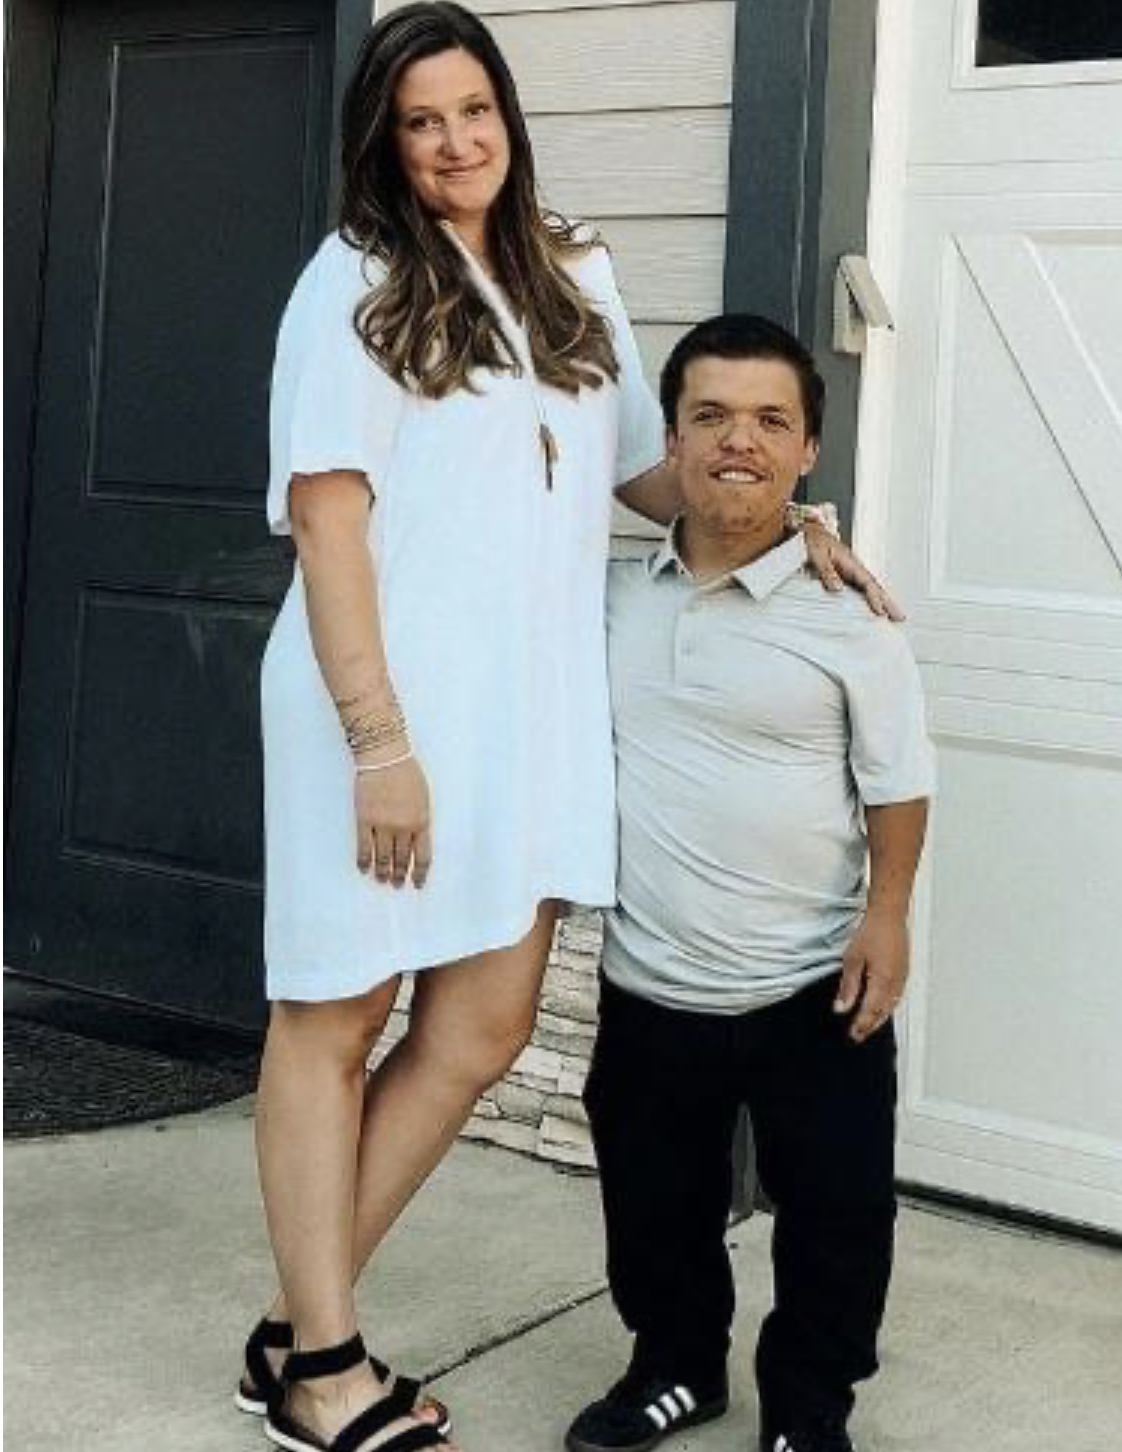 Tori Roloff Tells Husband She Isn’t Appreciated For Her Mothering Efforts: “You Don’t Give Me Any Credit”